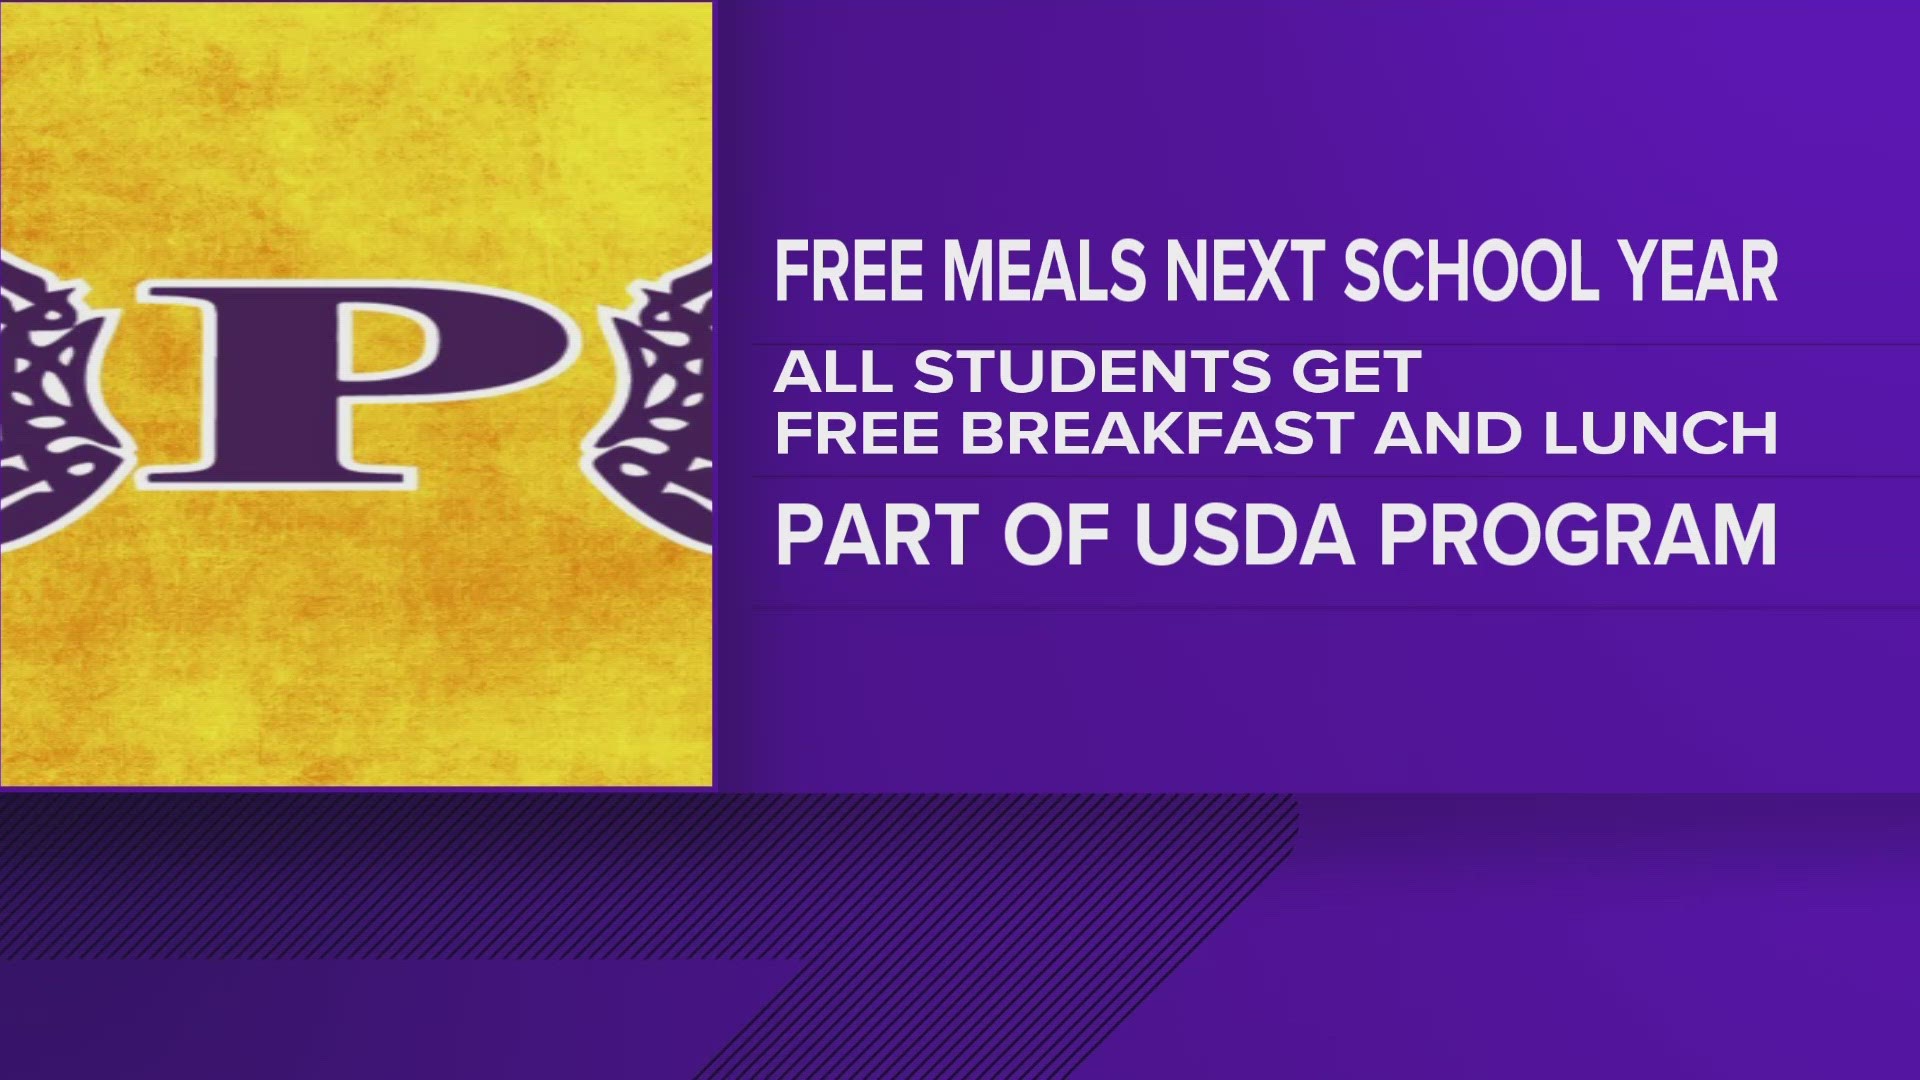 PBTISD qualified for a Community Eligibility Provision, which allow these meals to become free.